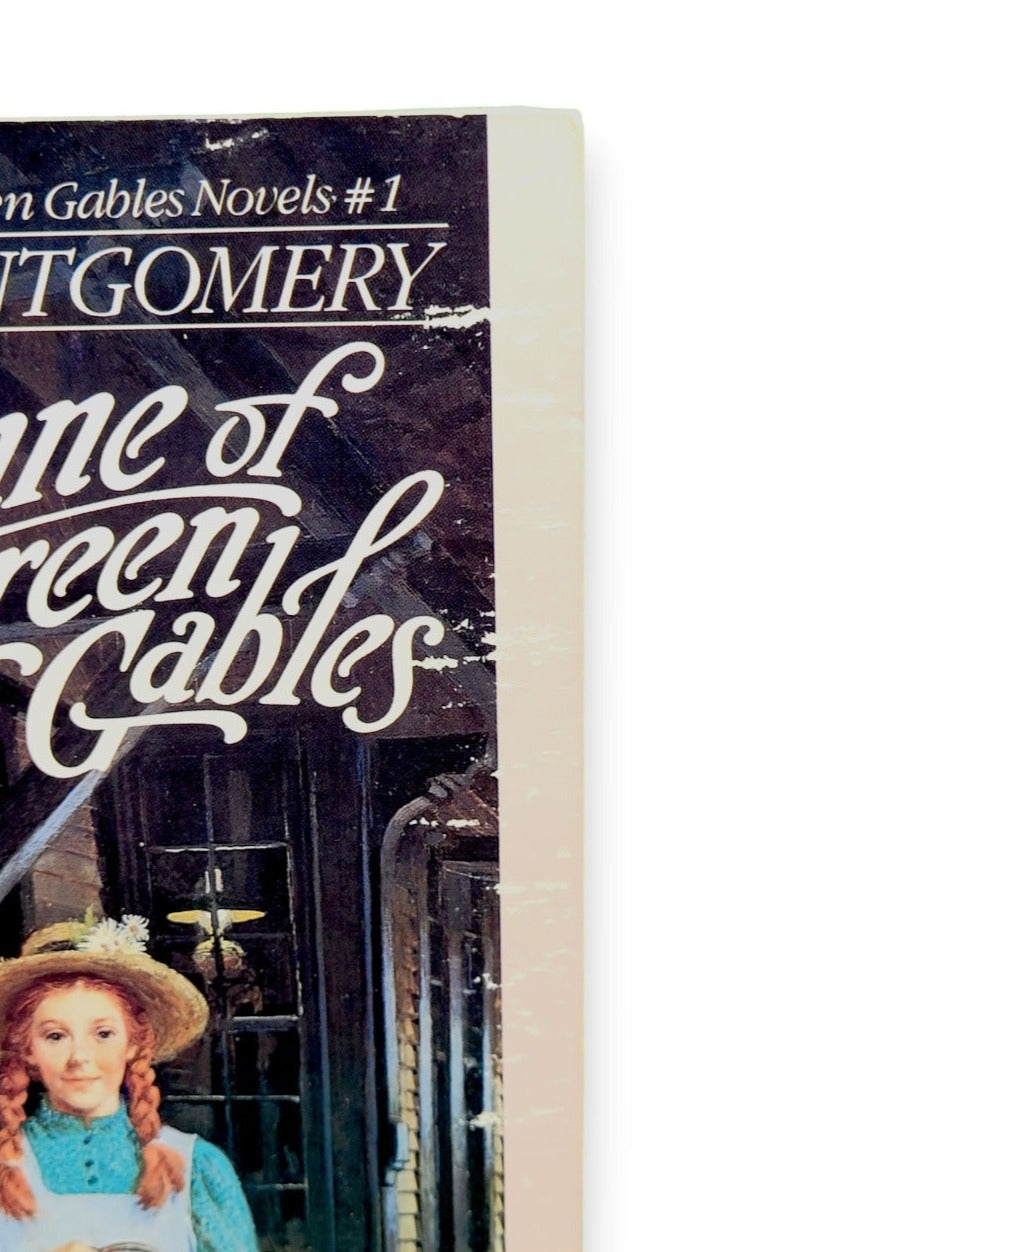 The Anne of Green Gables [Complete Set 1-8] by L.M. Montgomery 1992